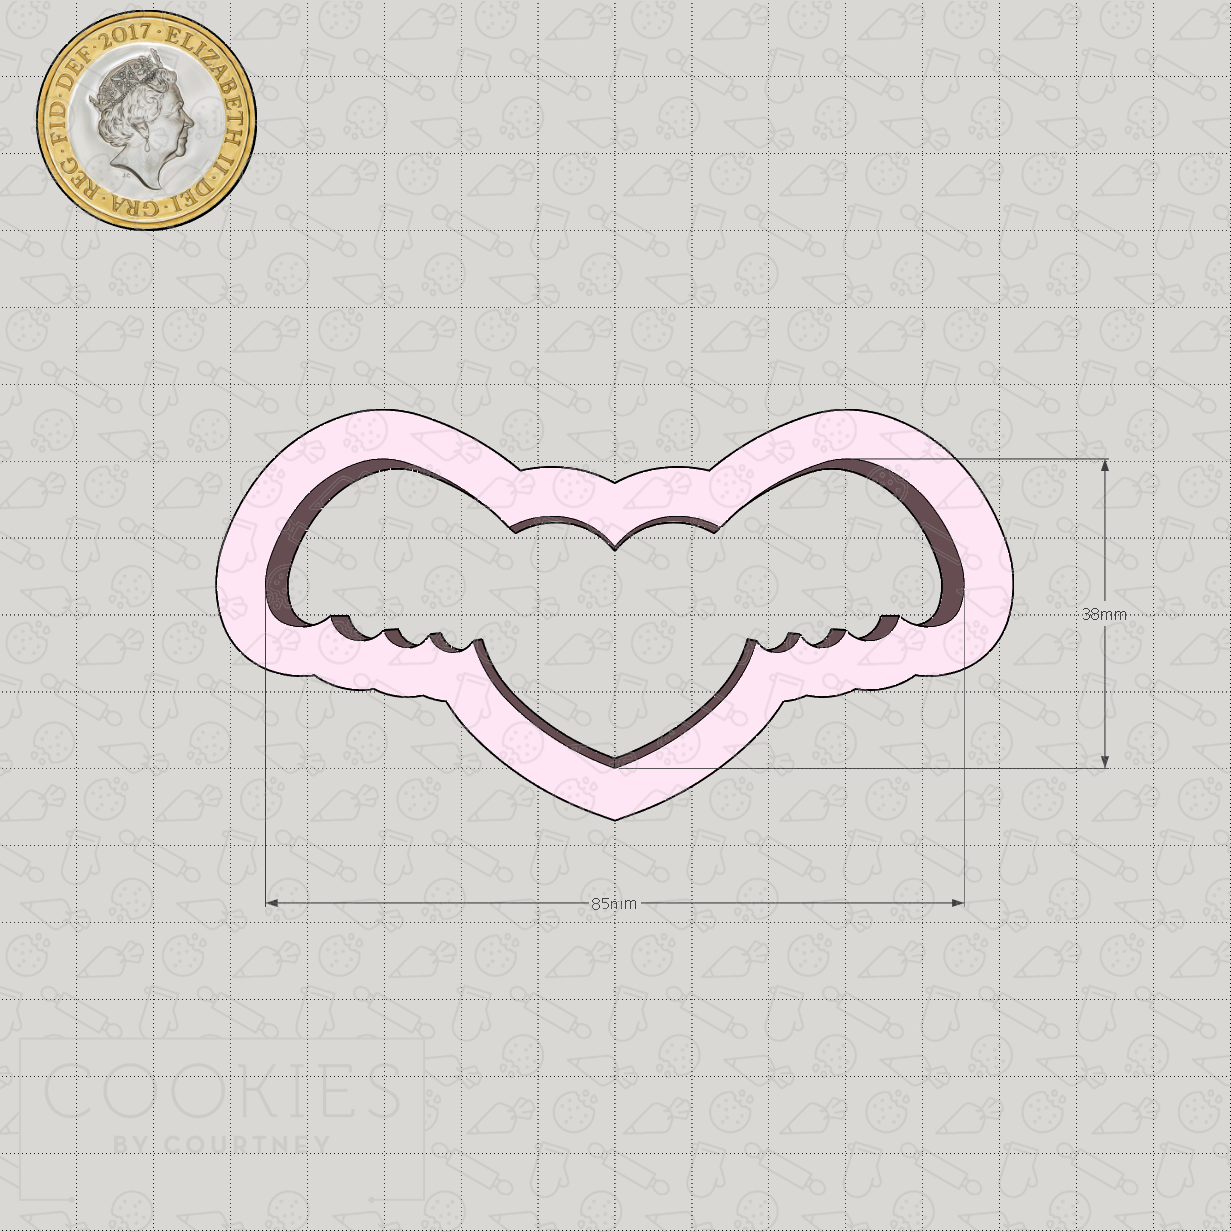 Heart with Wings Cookie Cutter